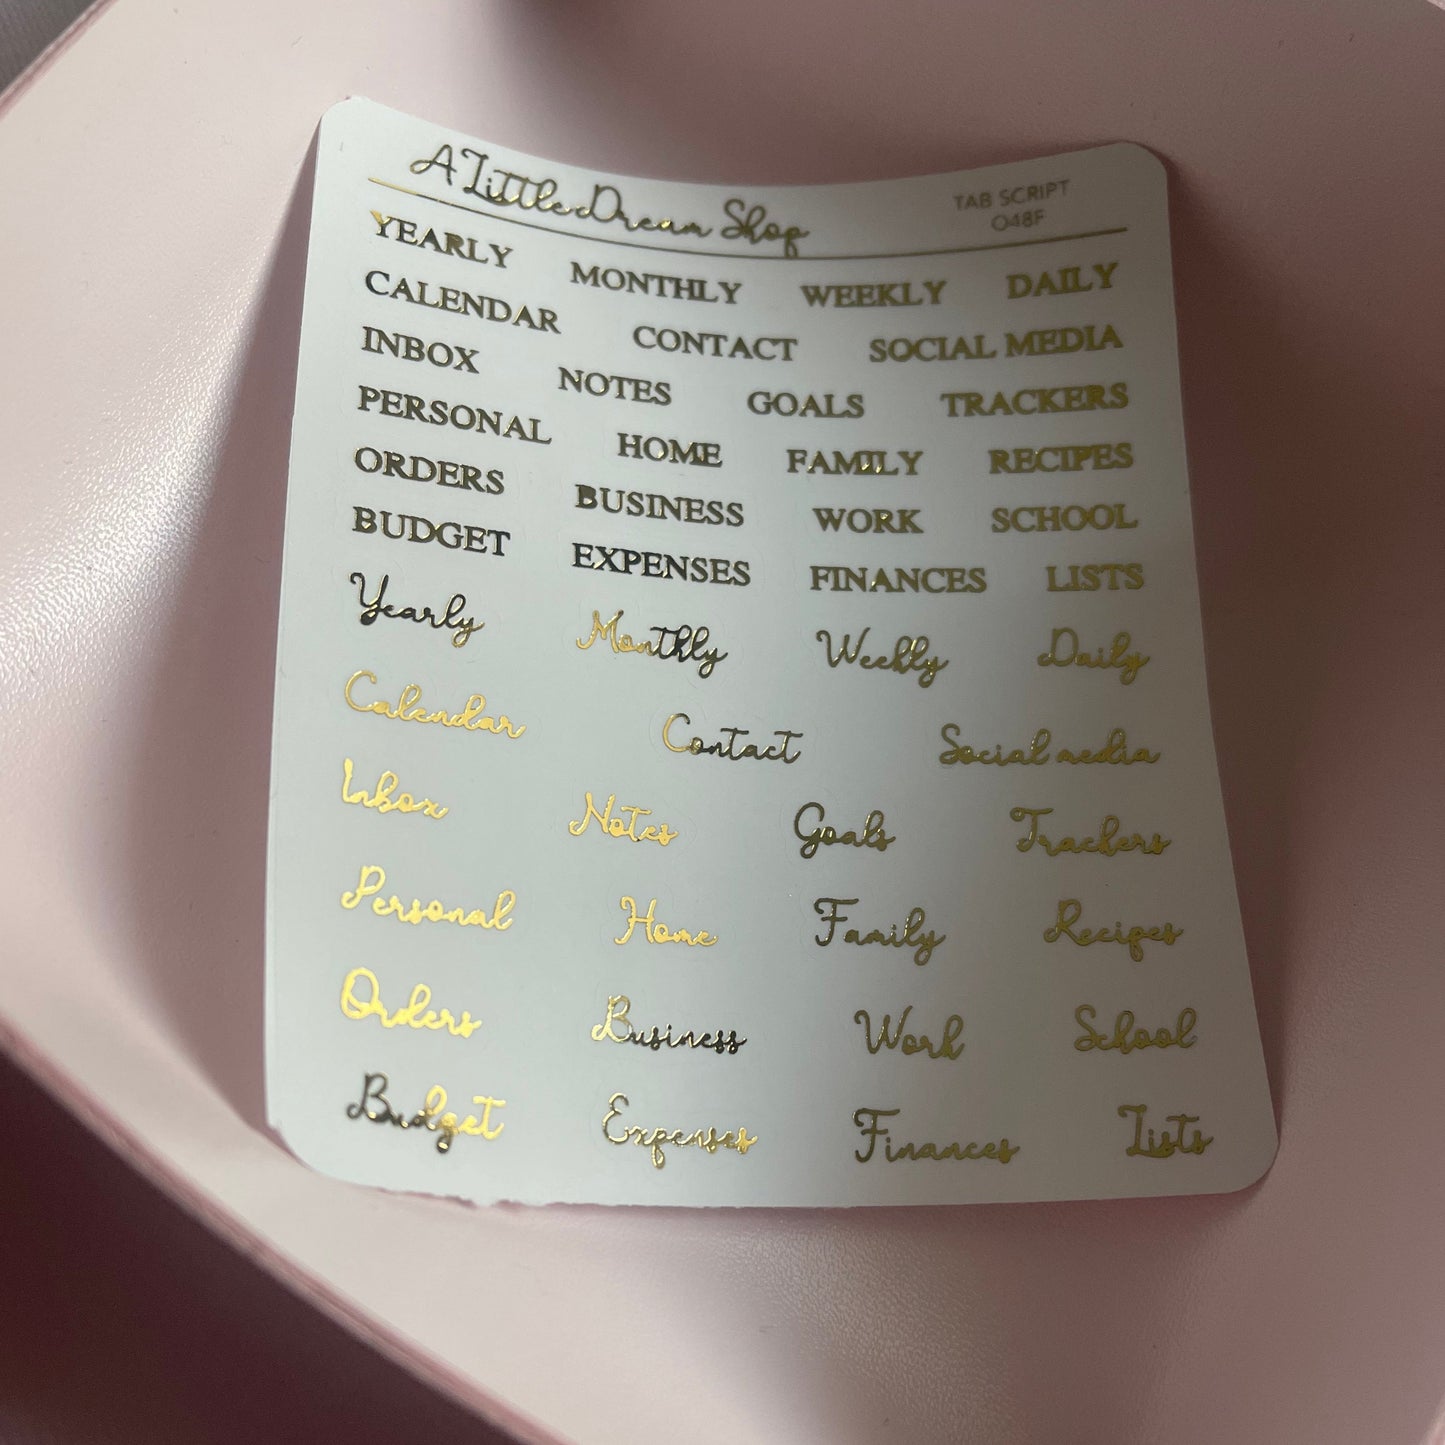 Tabs Scripts - Foiled Stickers Sheet